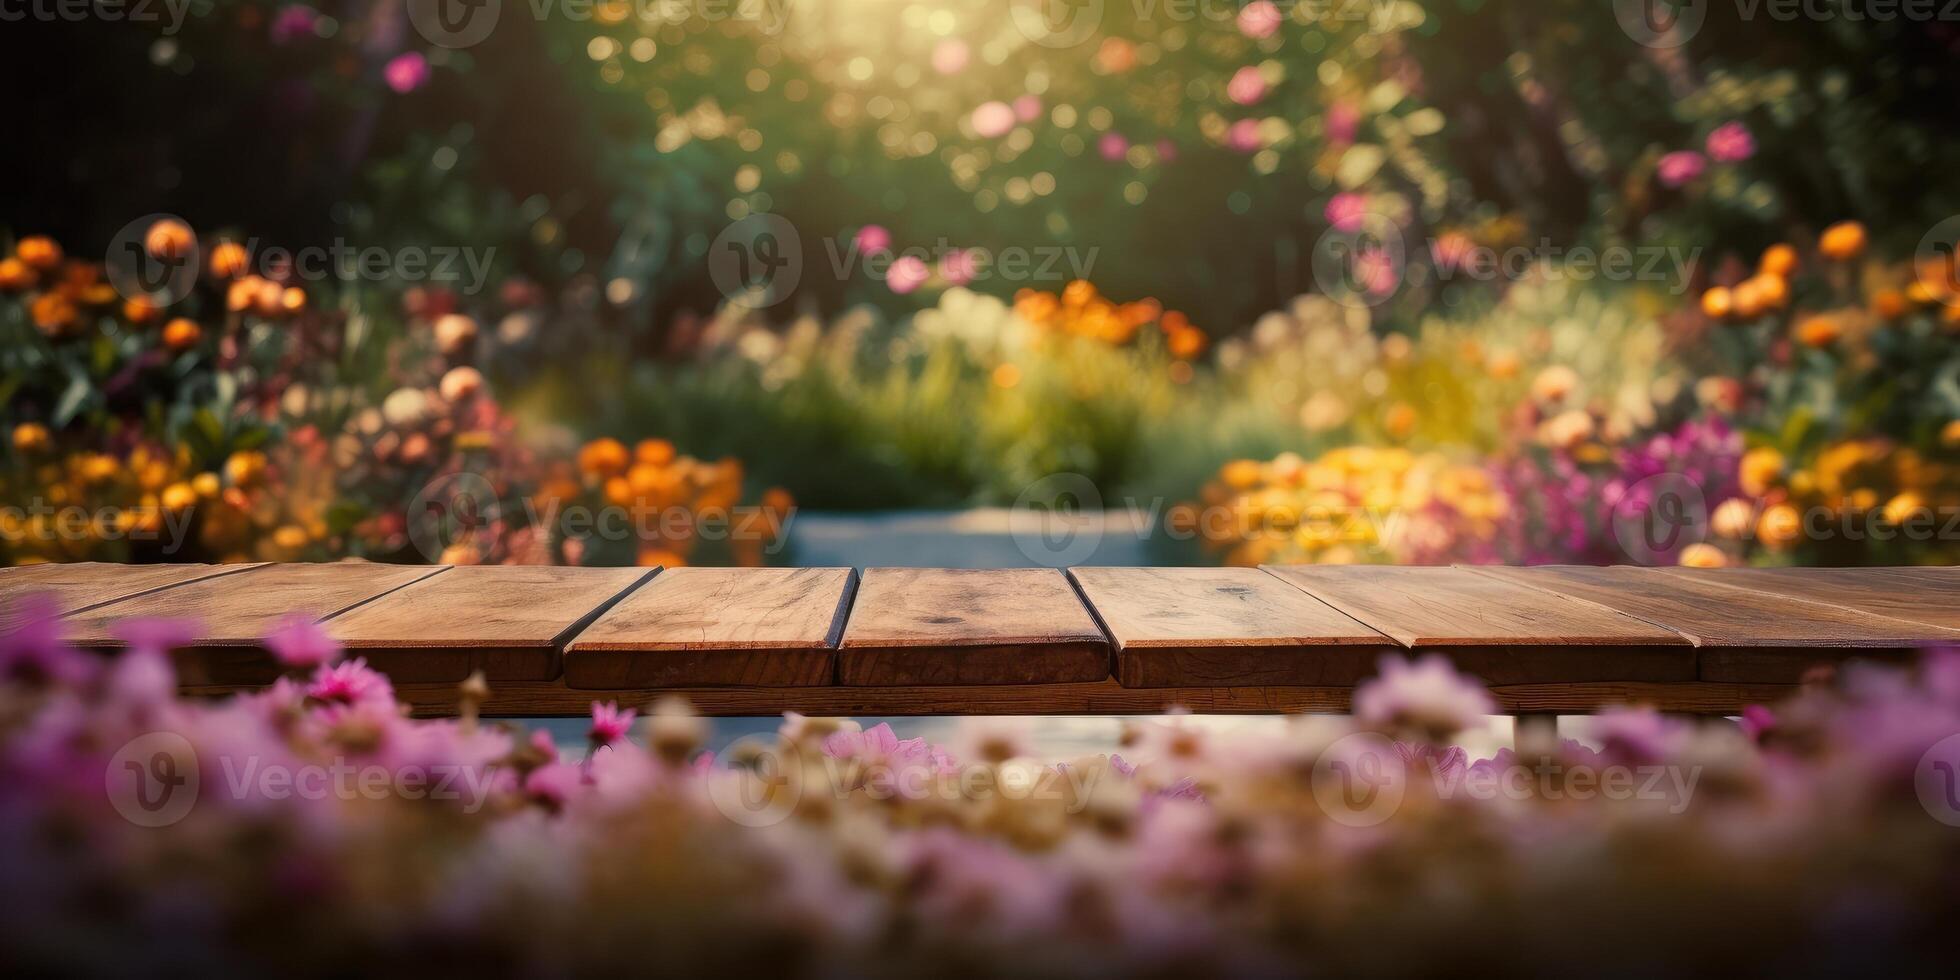 Empty wooden table in flowers garden blurred background, Free space for product display. photo